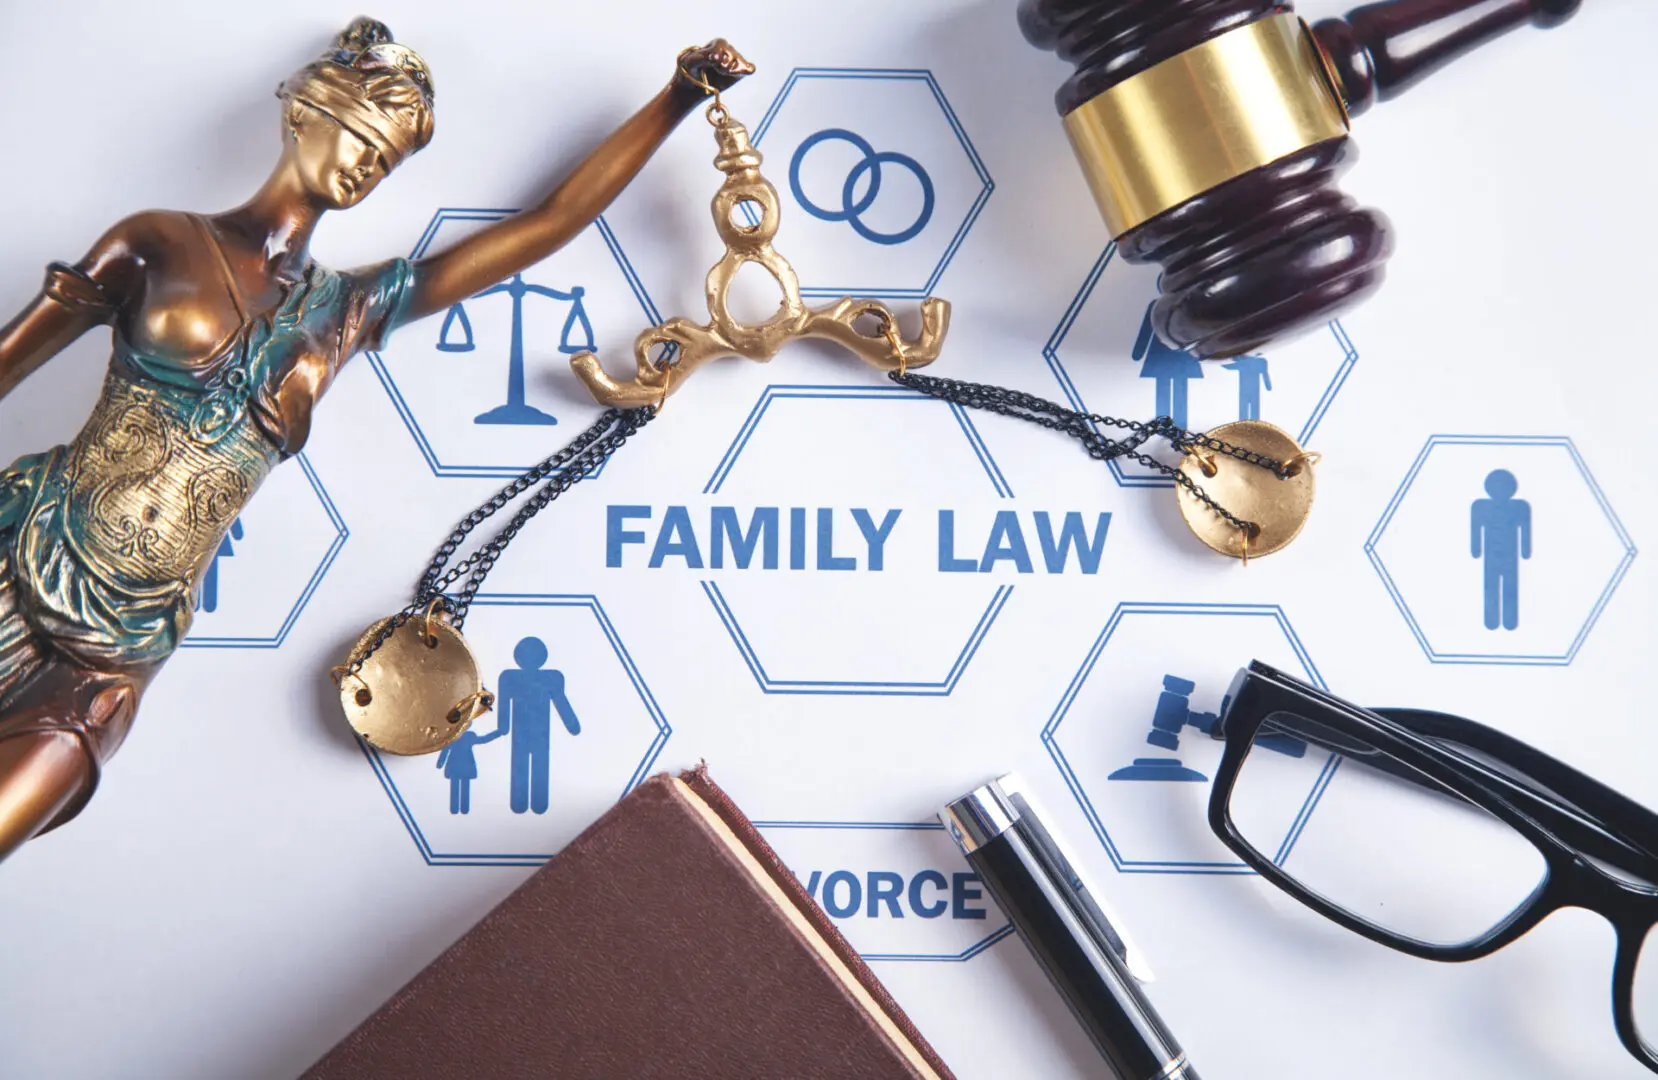 A family law diagram with a gavel, key and other items.